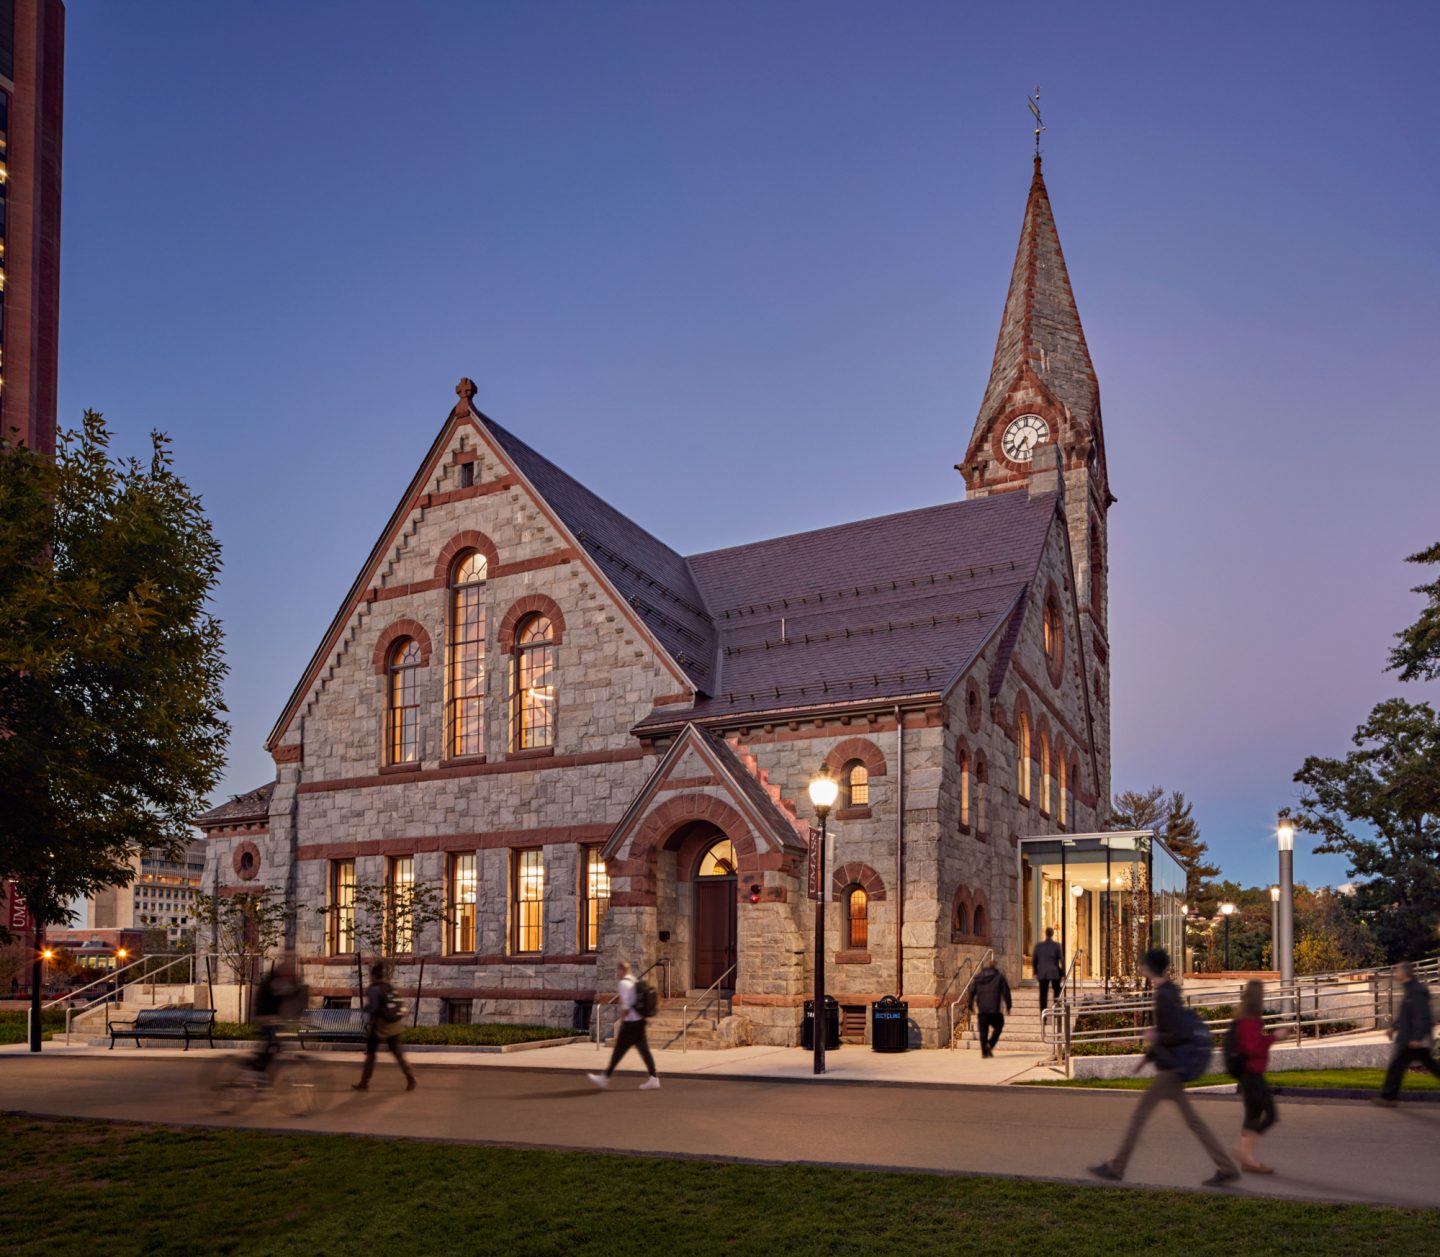 Old Chapel UMASS Amherst - 1884 Richardsonian Romanesque Revival style 19th century building with renovation by Finegold Alexander Architects, Inc. in 2015.